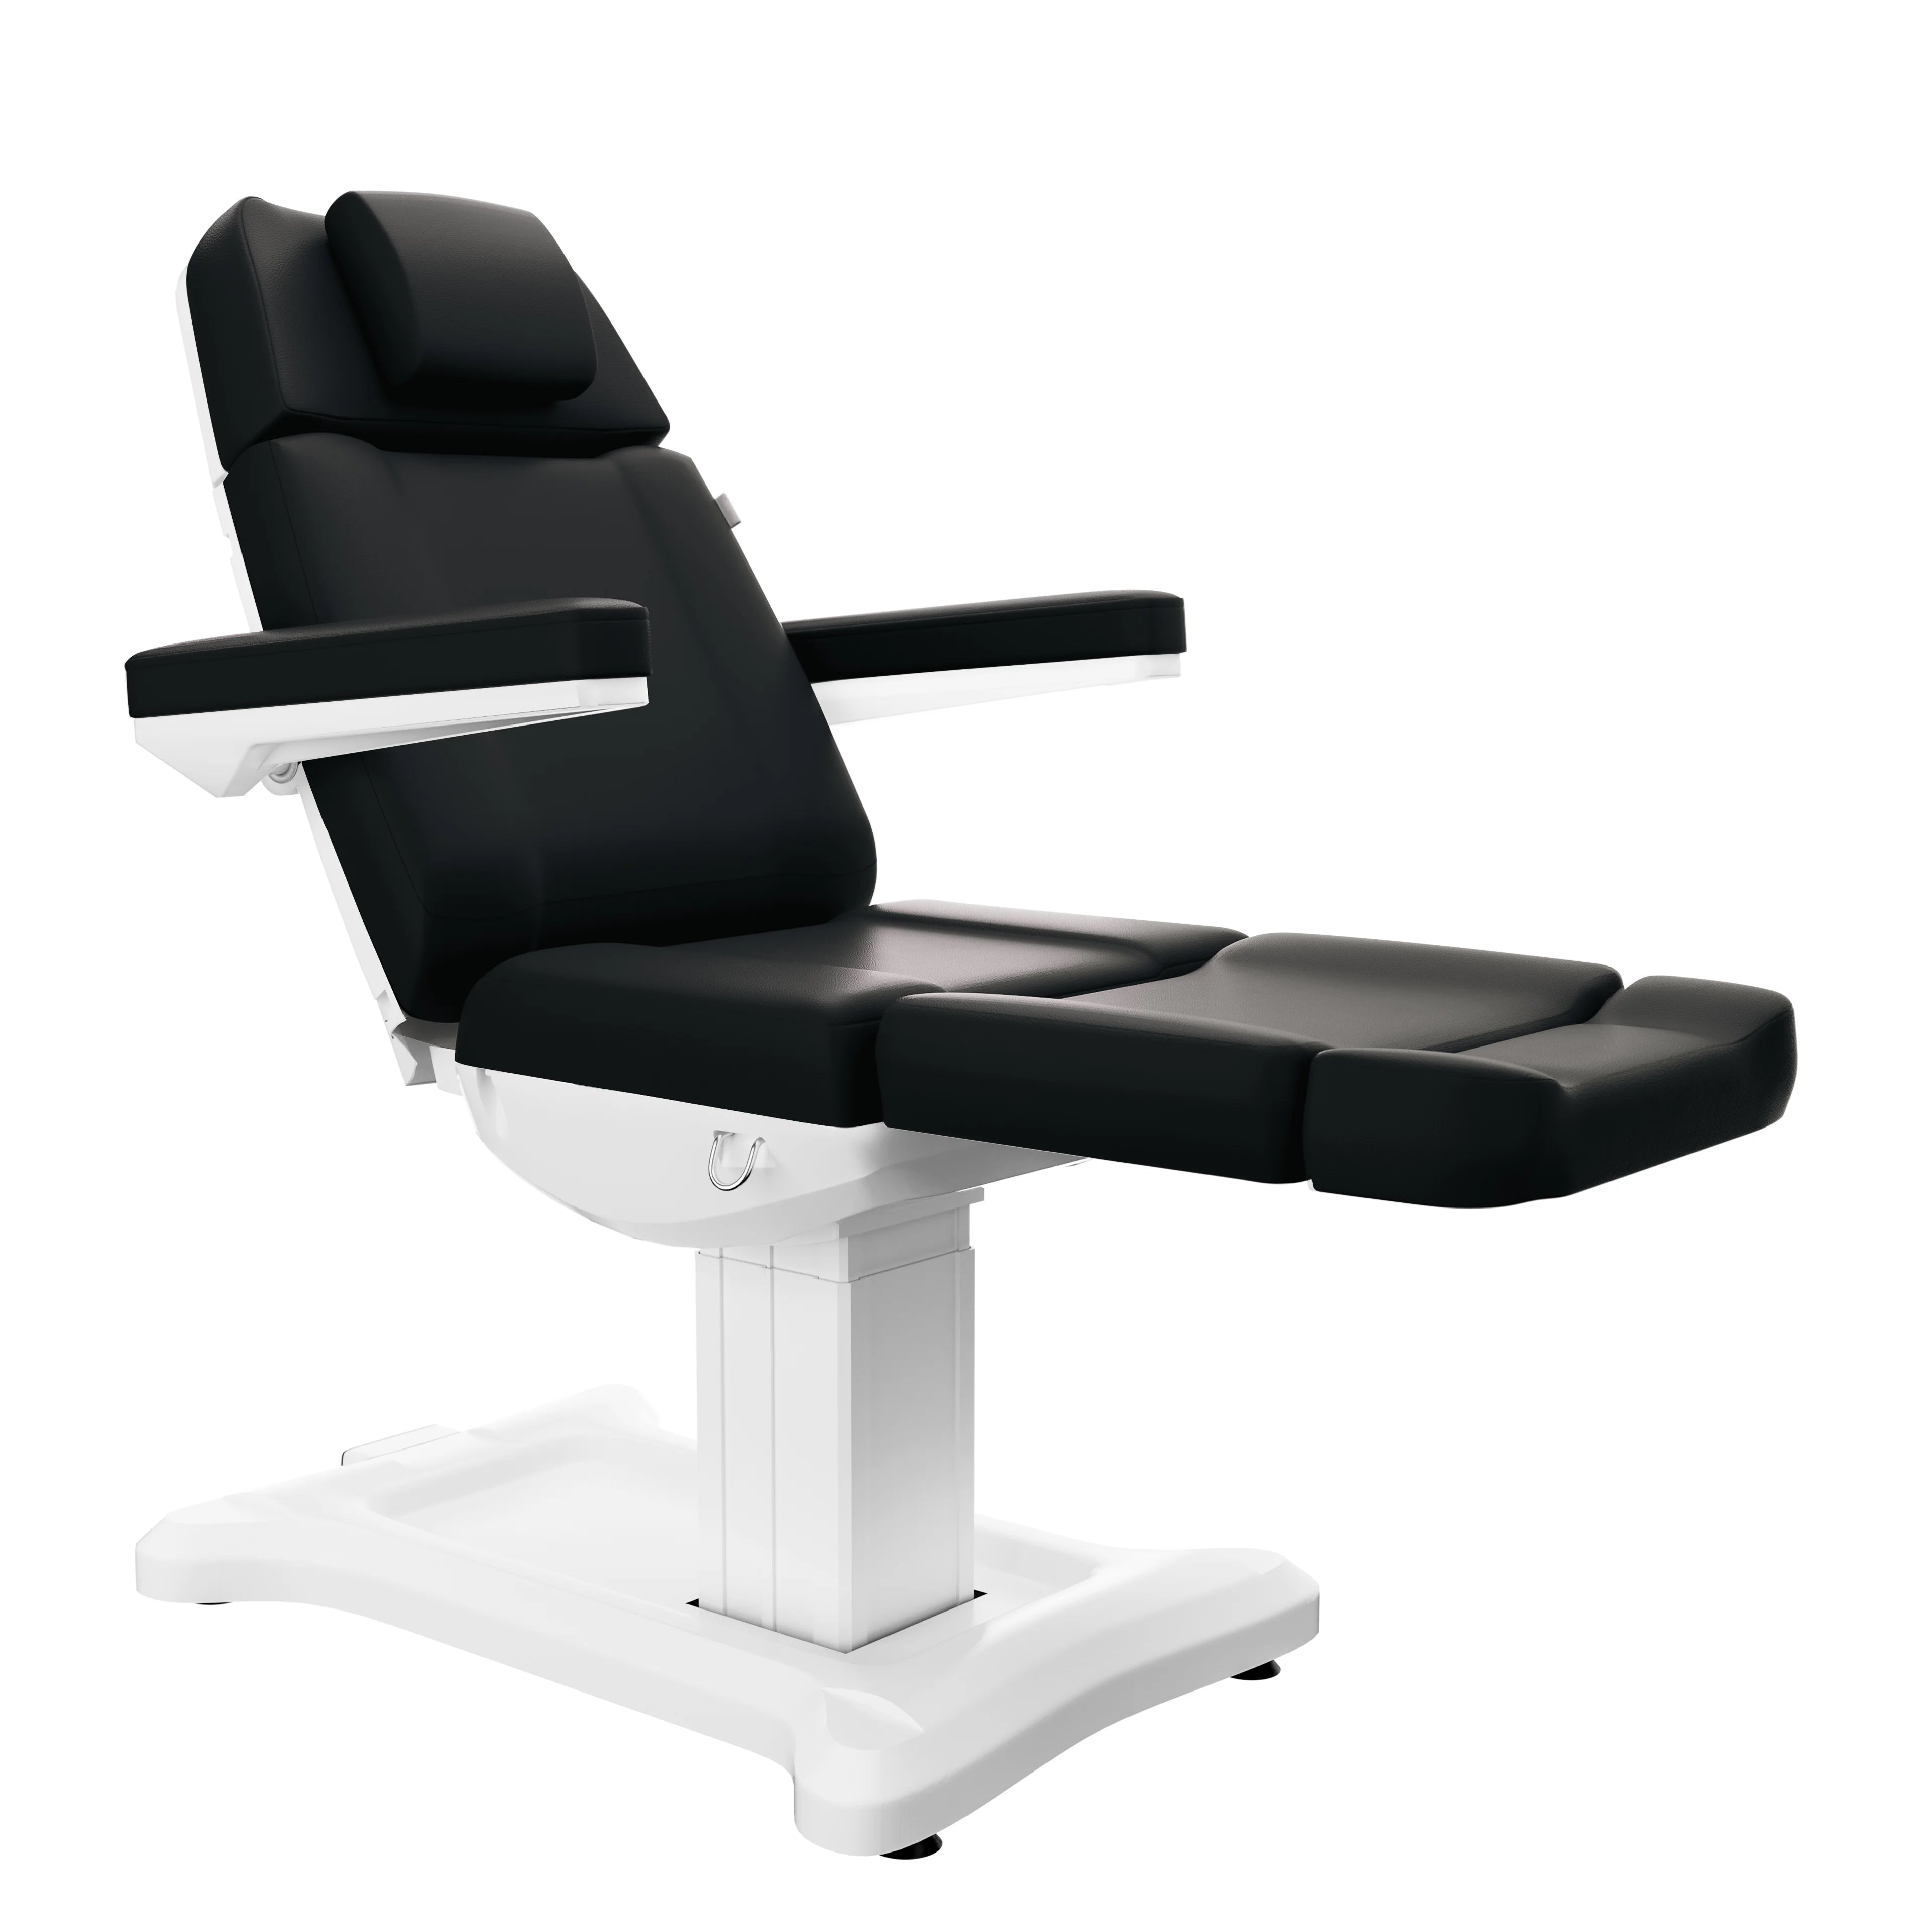 SpaMarc . Tomar (Black) . 3 Motor Spa Treatment Chair / Bed